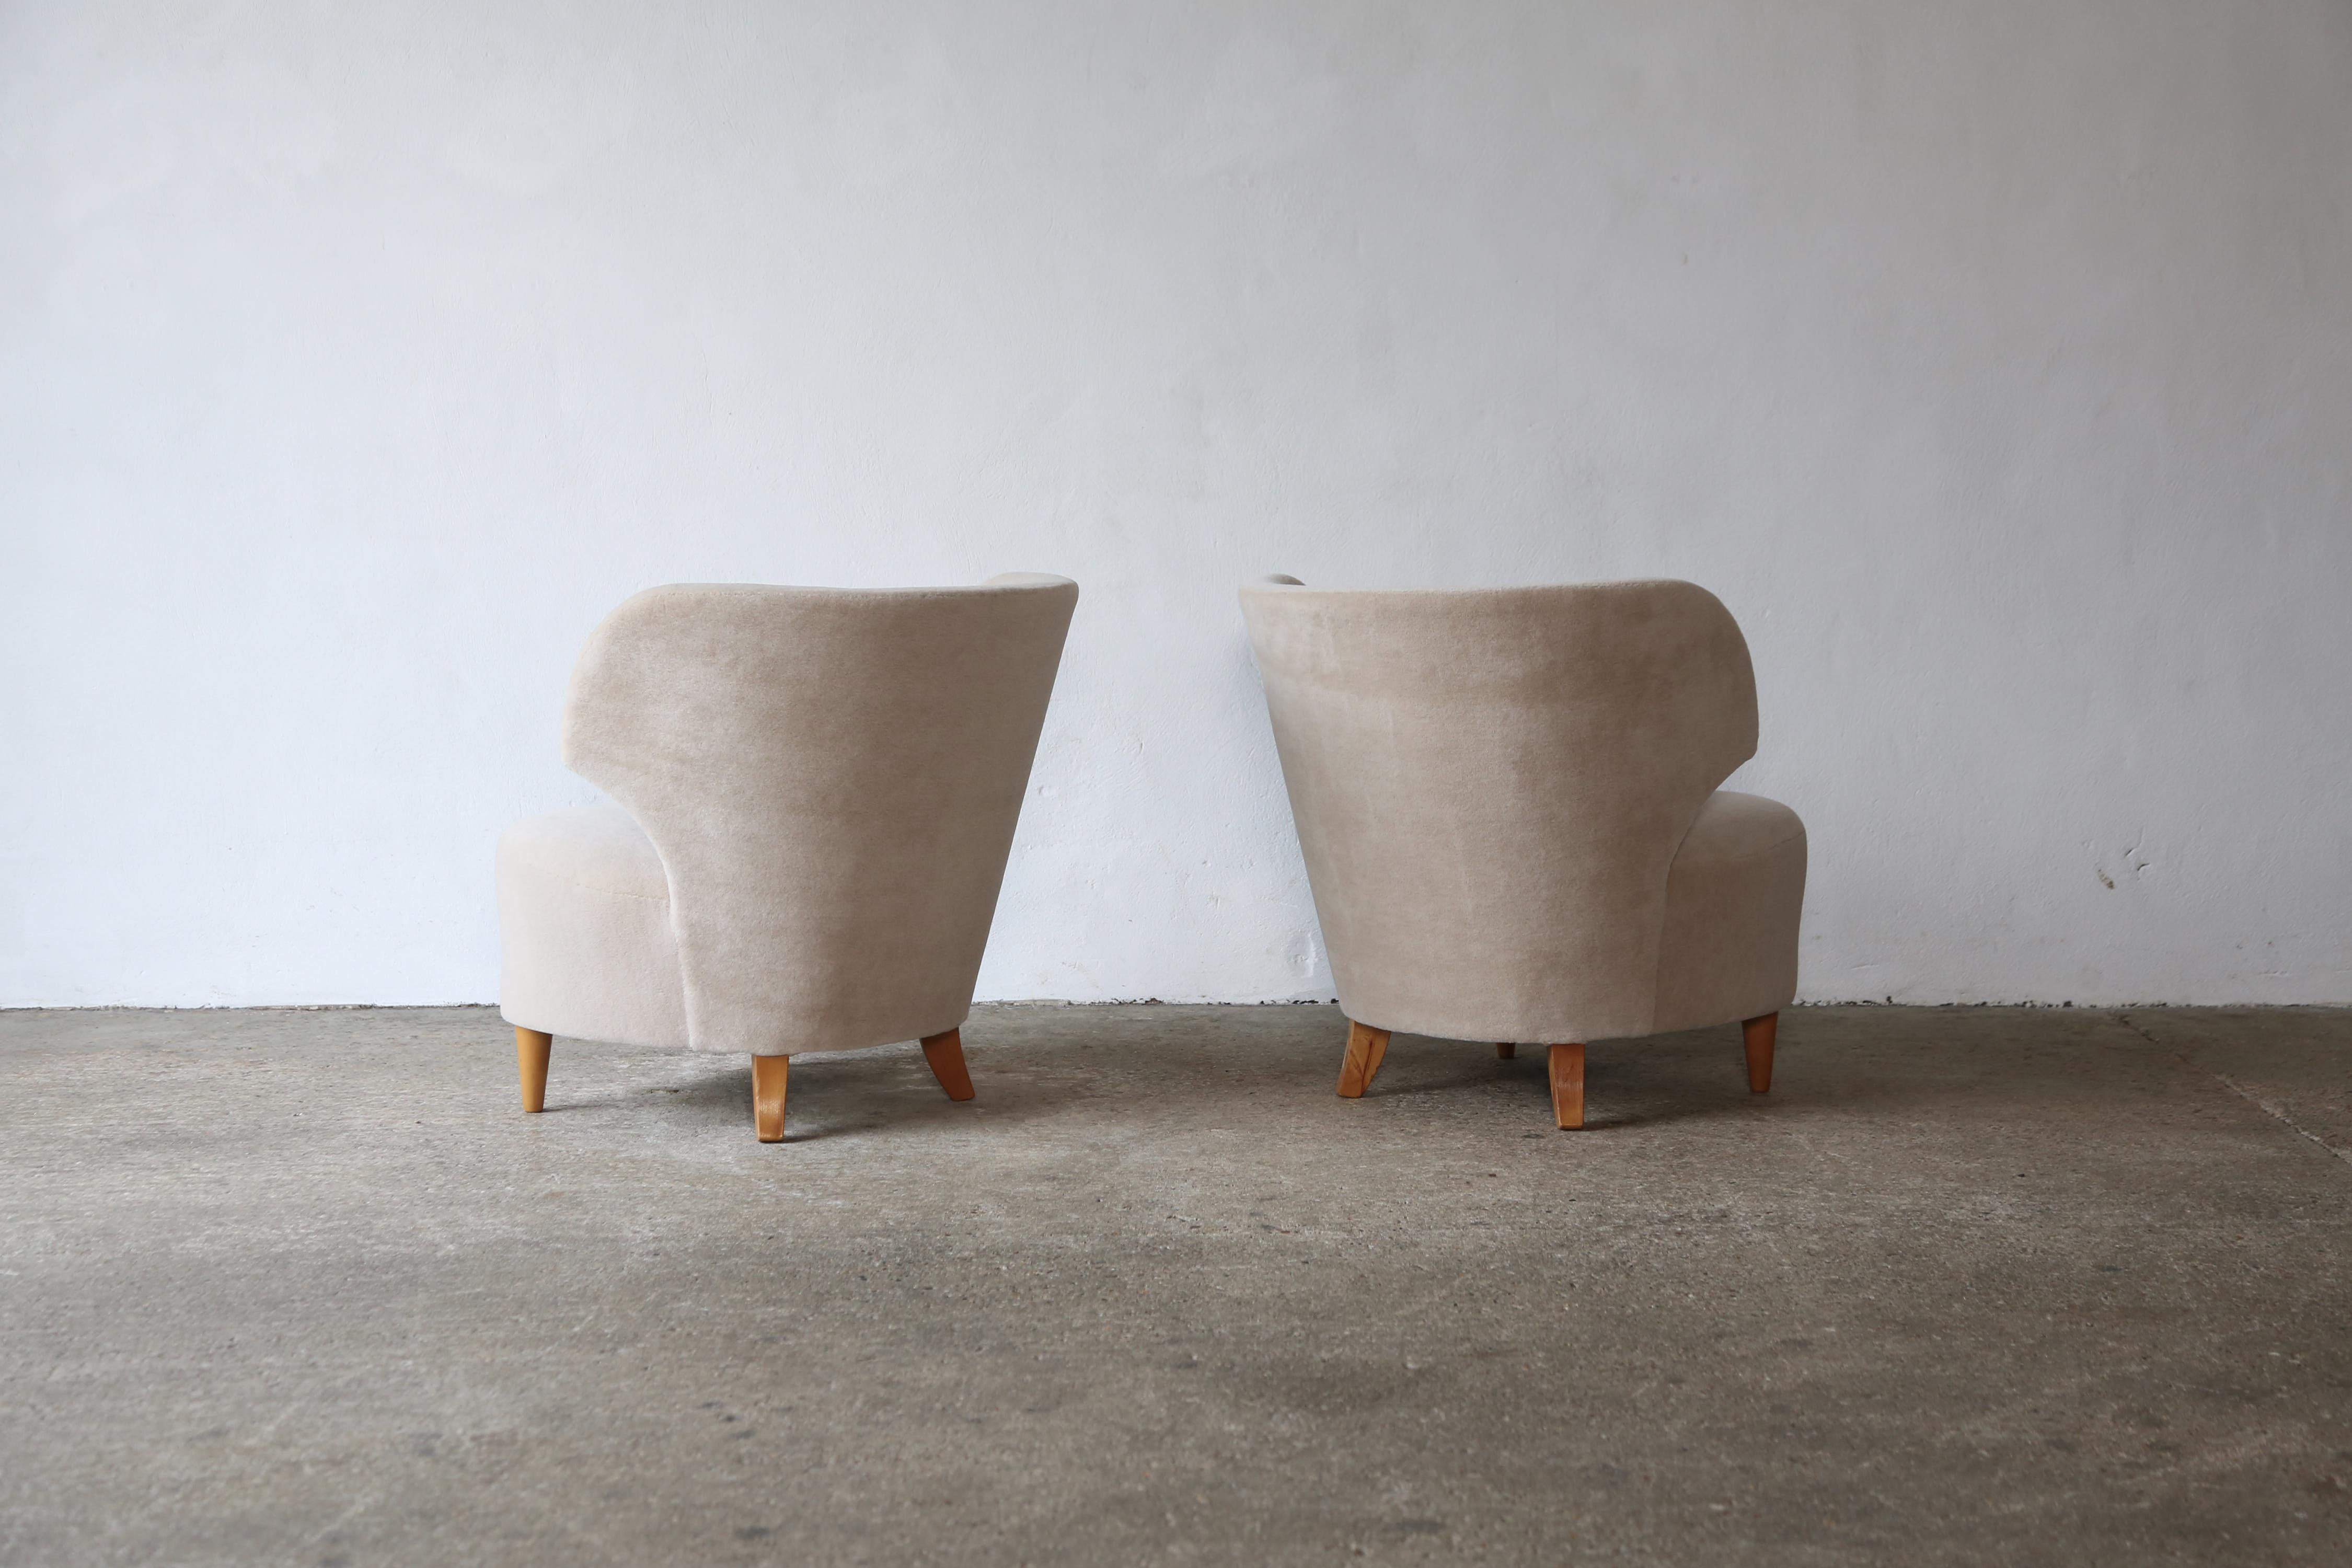 Pair of Carl-Johan Boman Chairs, Finland, 1940s, Newly Upholstered in Alpaca 1